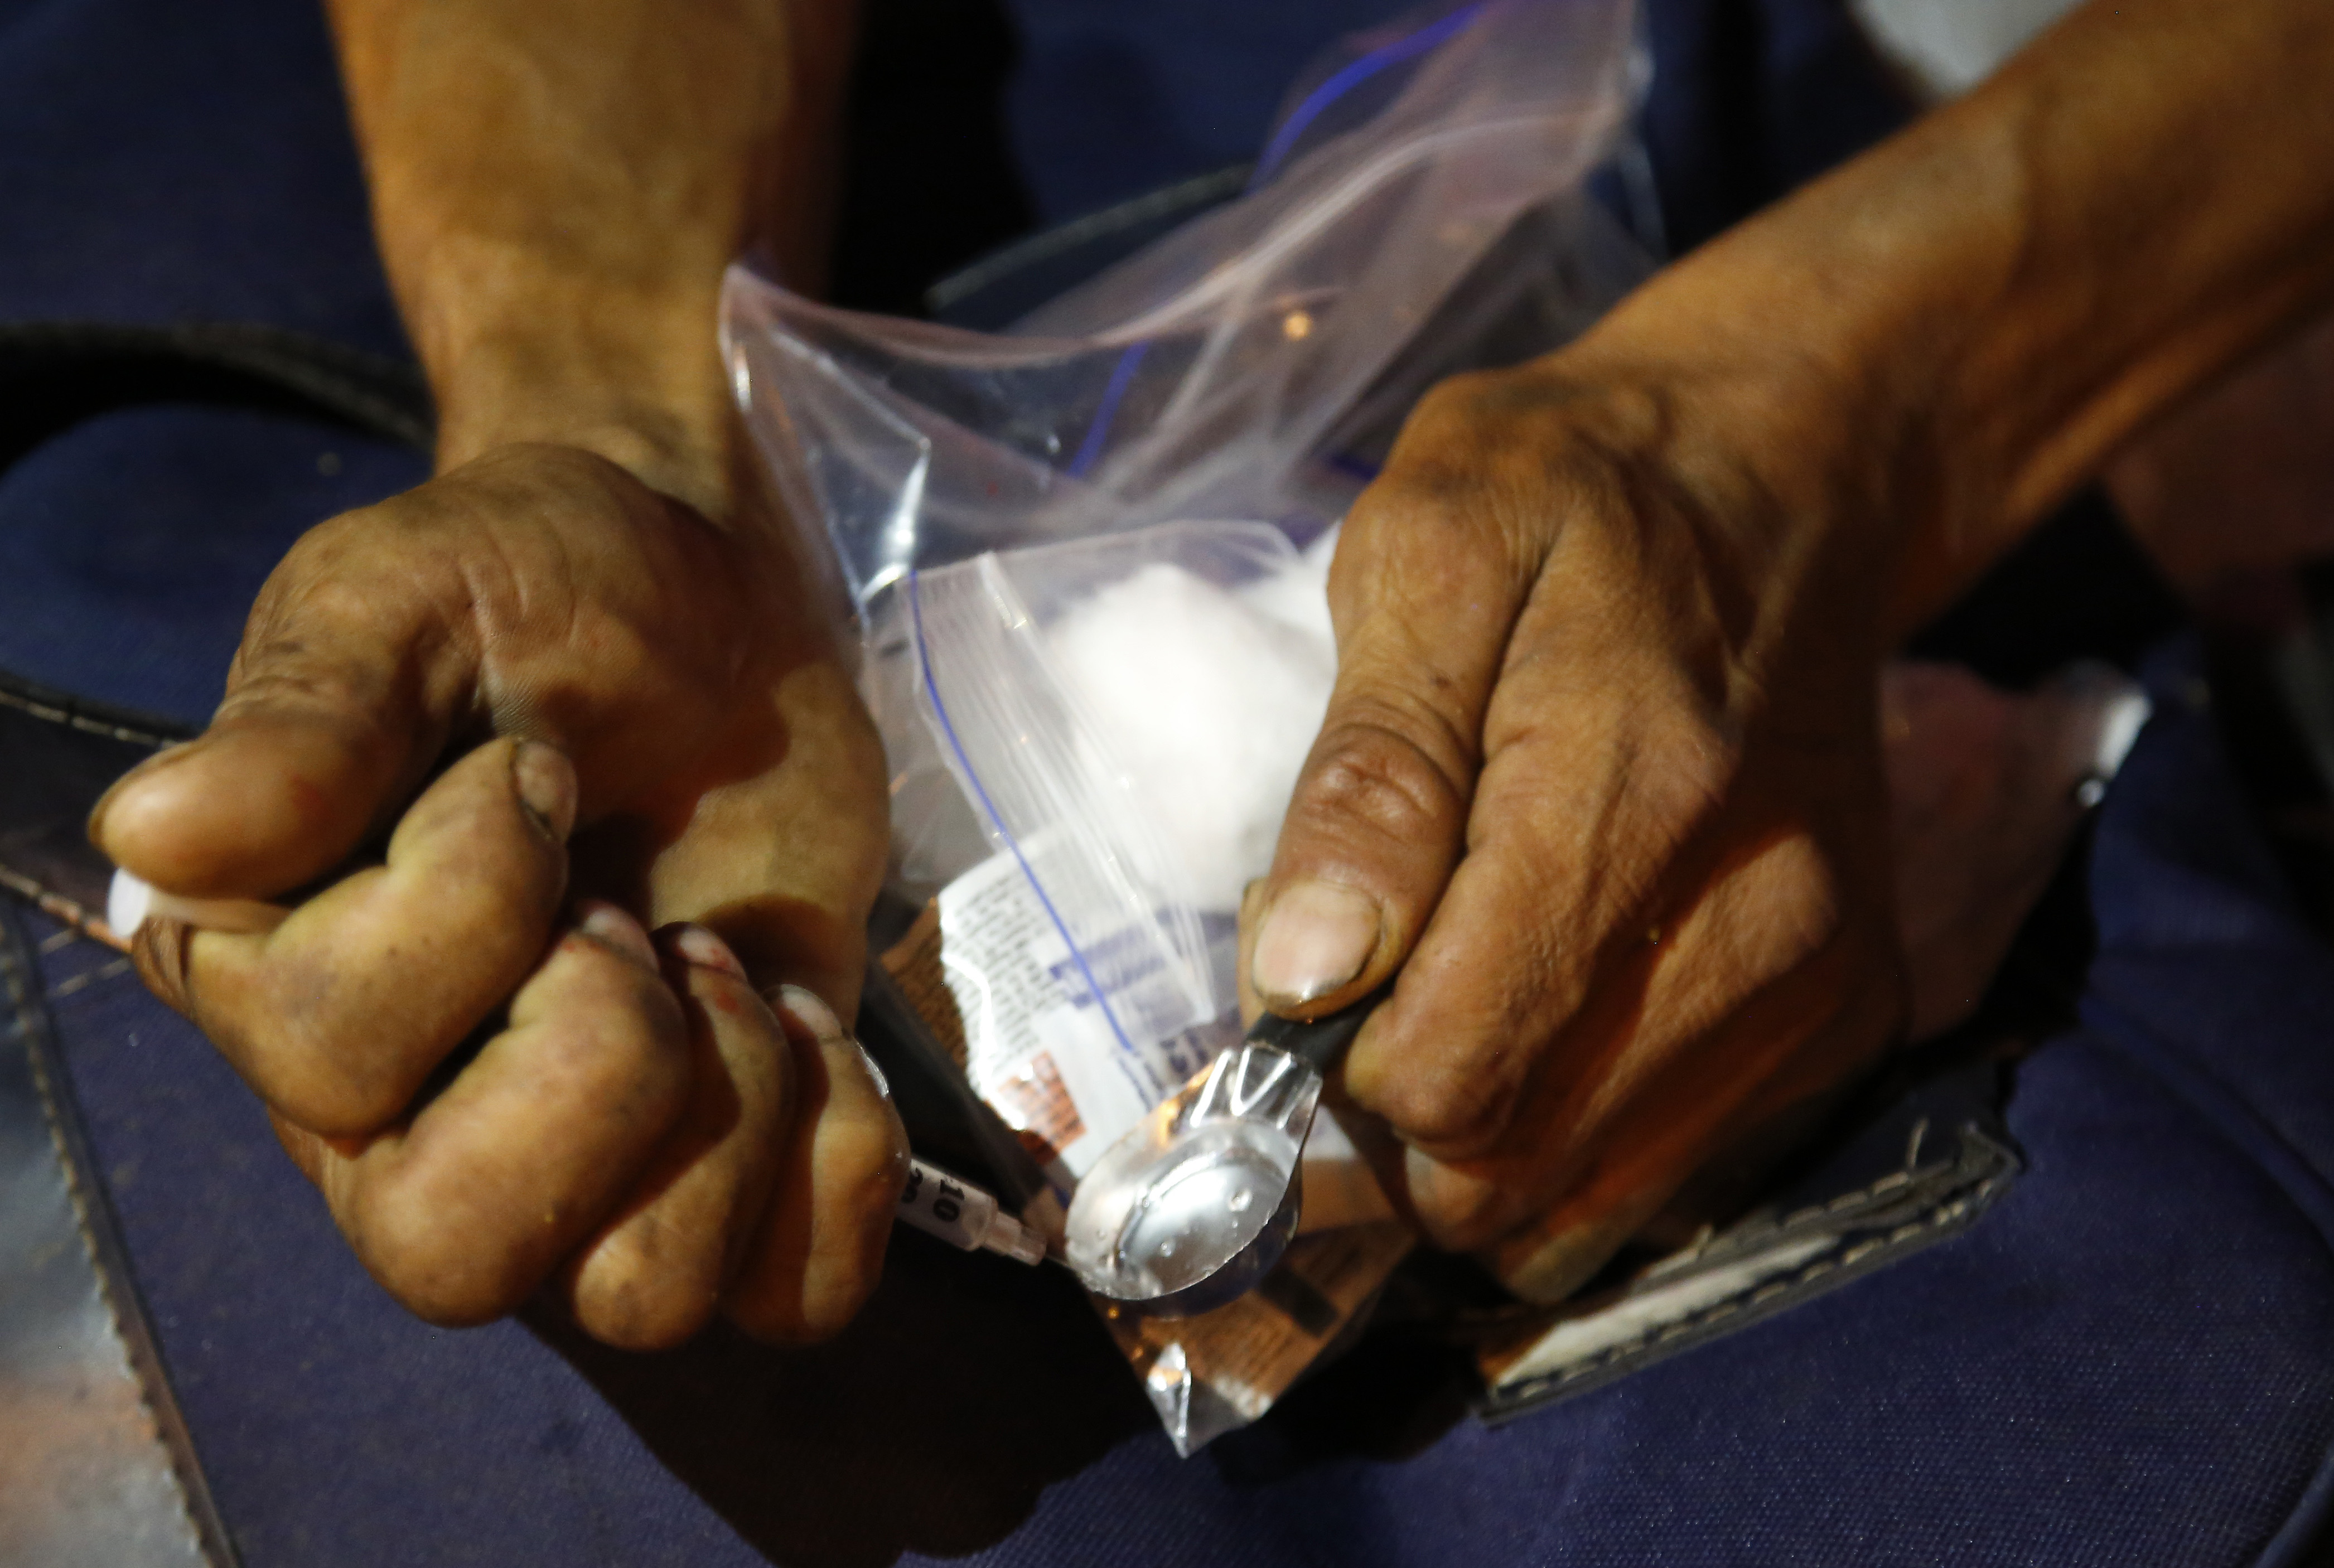 An addict prepares shoot up heroin after receiving a kit including a spoon, a rubber tube, cotton, sterilized water and clean syringes distributed by a program sponsored by the Open Society Foundation and government agencies in Dosquebradas, Colombia. (AP/Fernando Vergara)